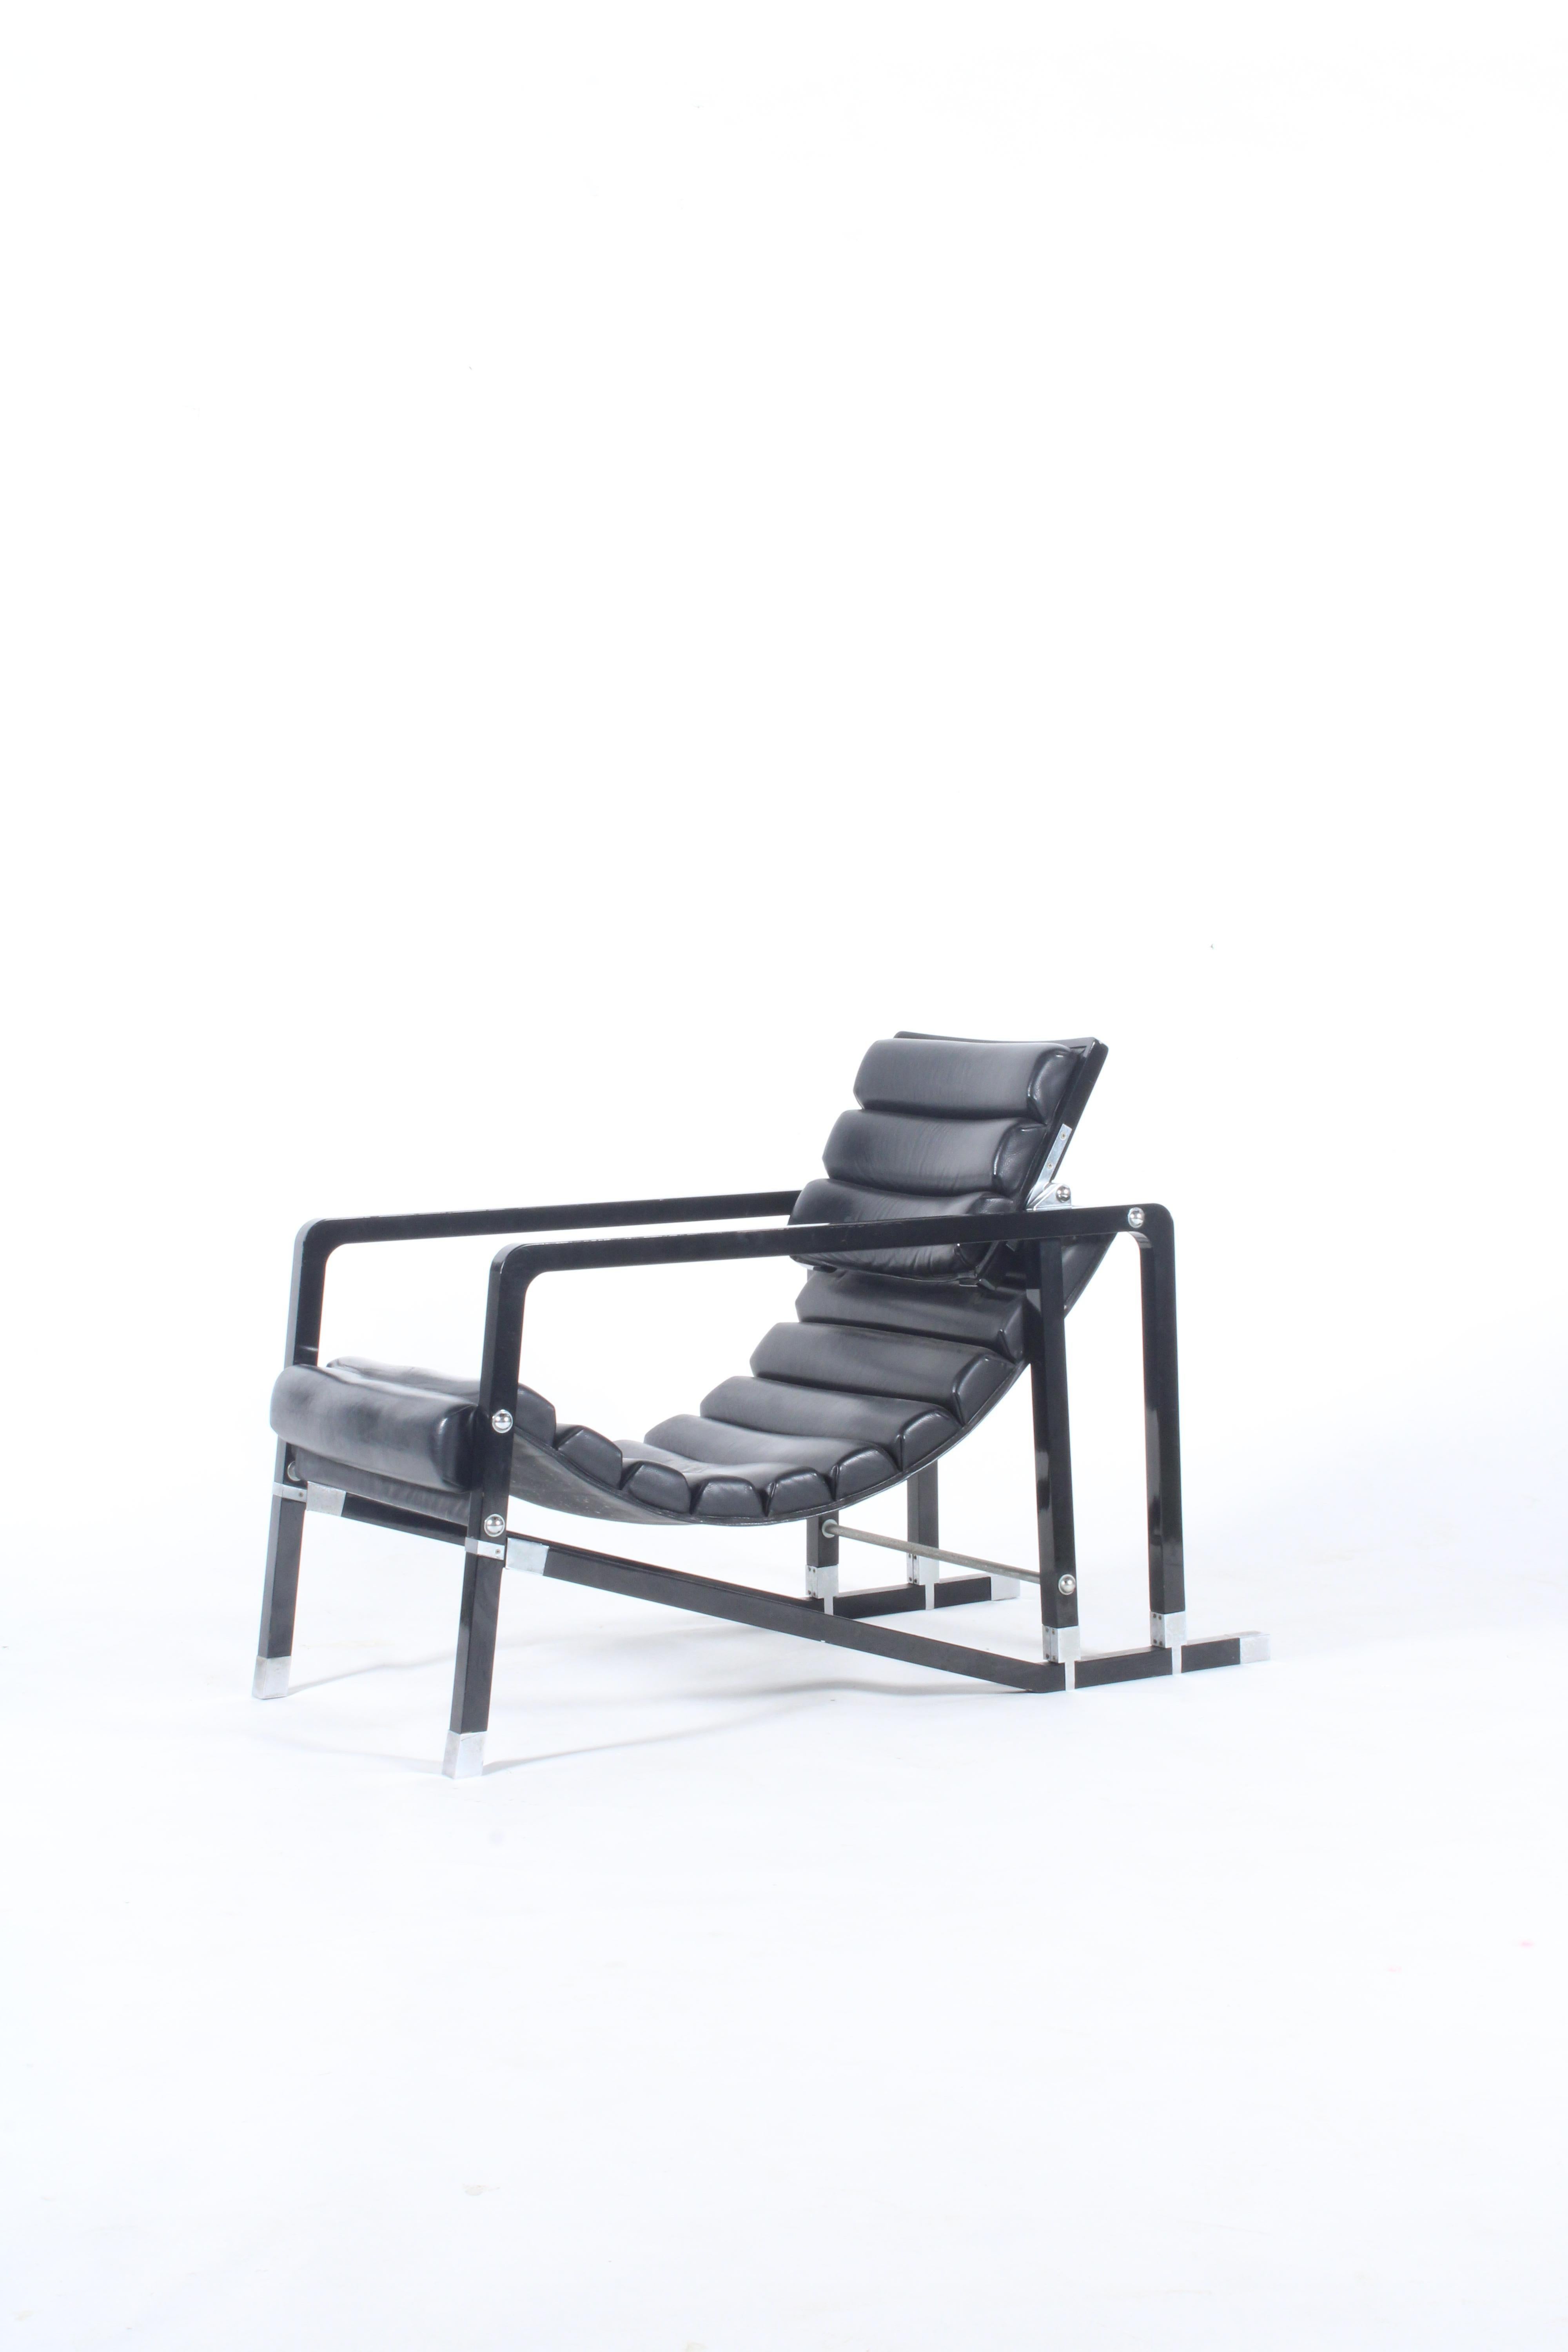 Modern Vintage Early Edition Transat Chair By Eileen Gray for Ecart International  For Sale